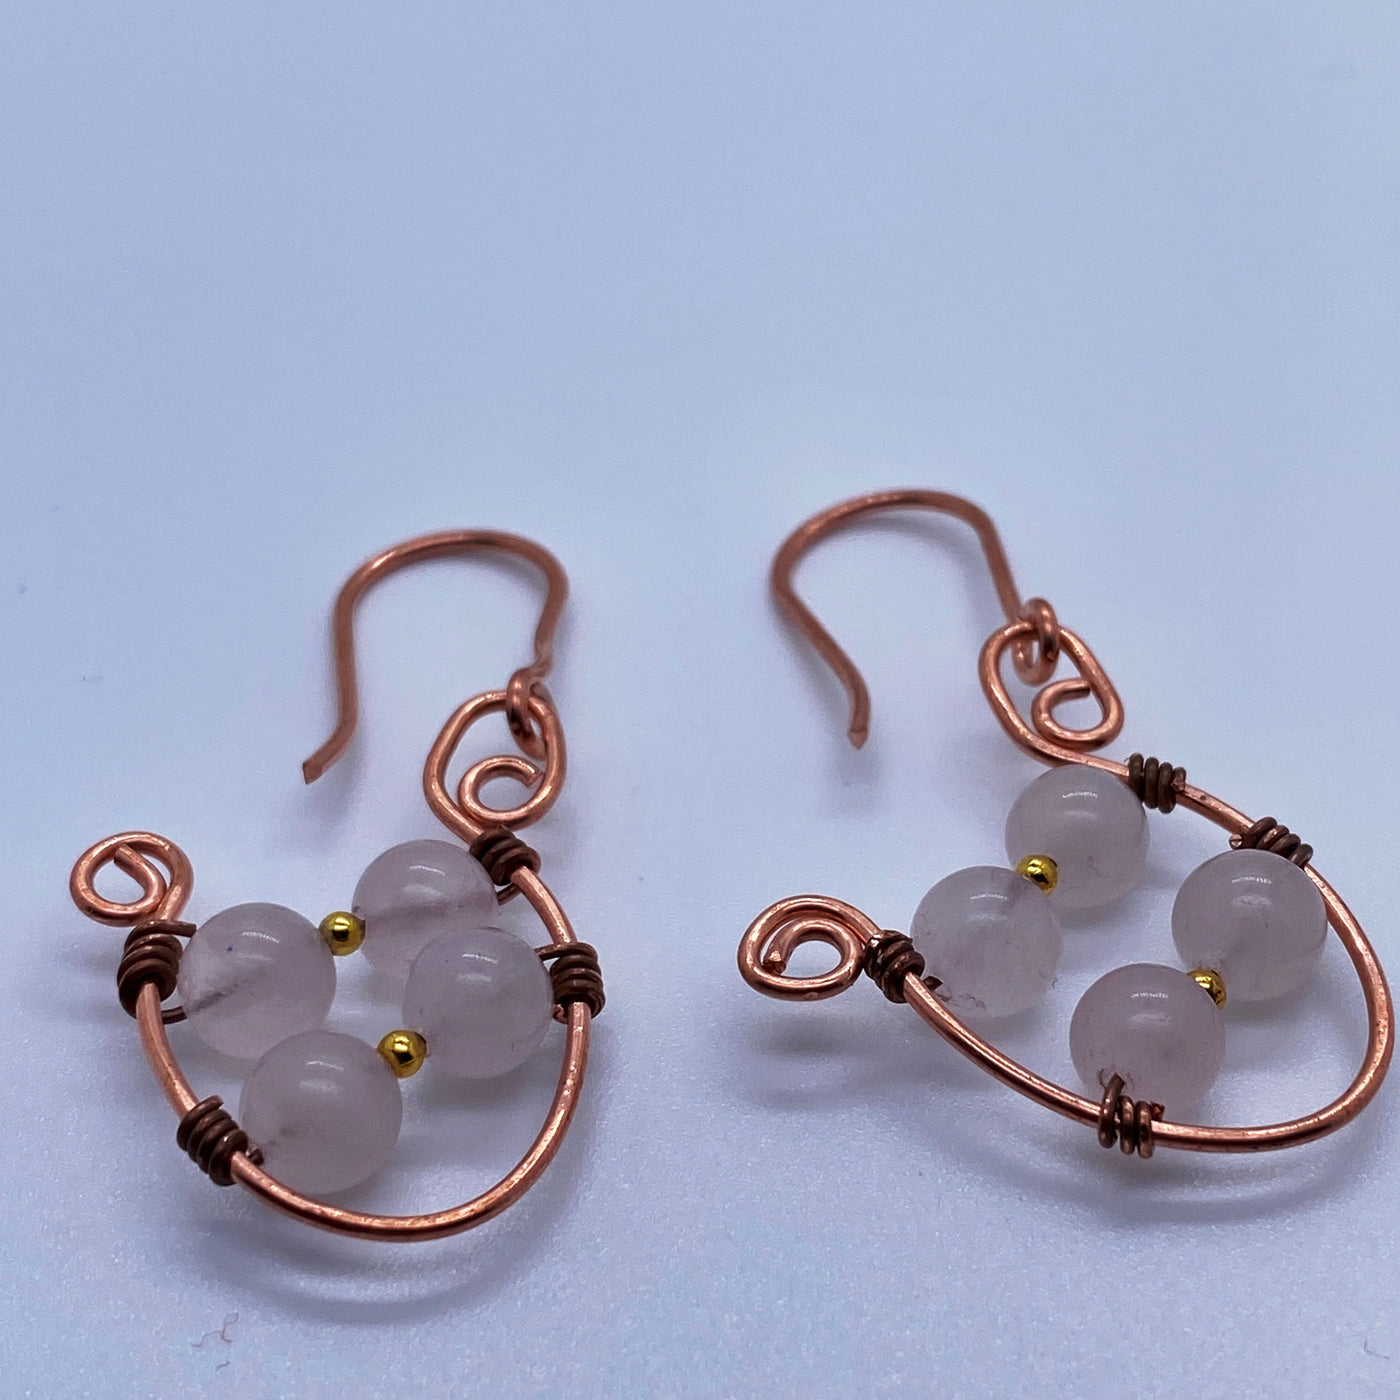 Rose quartz earrings and wire.